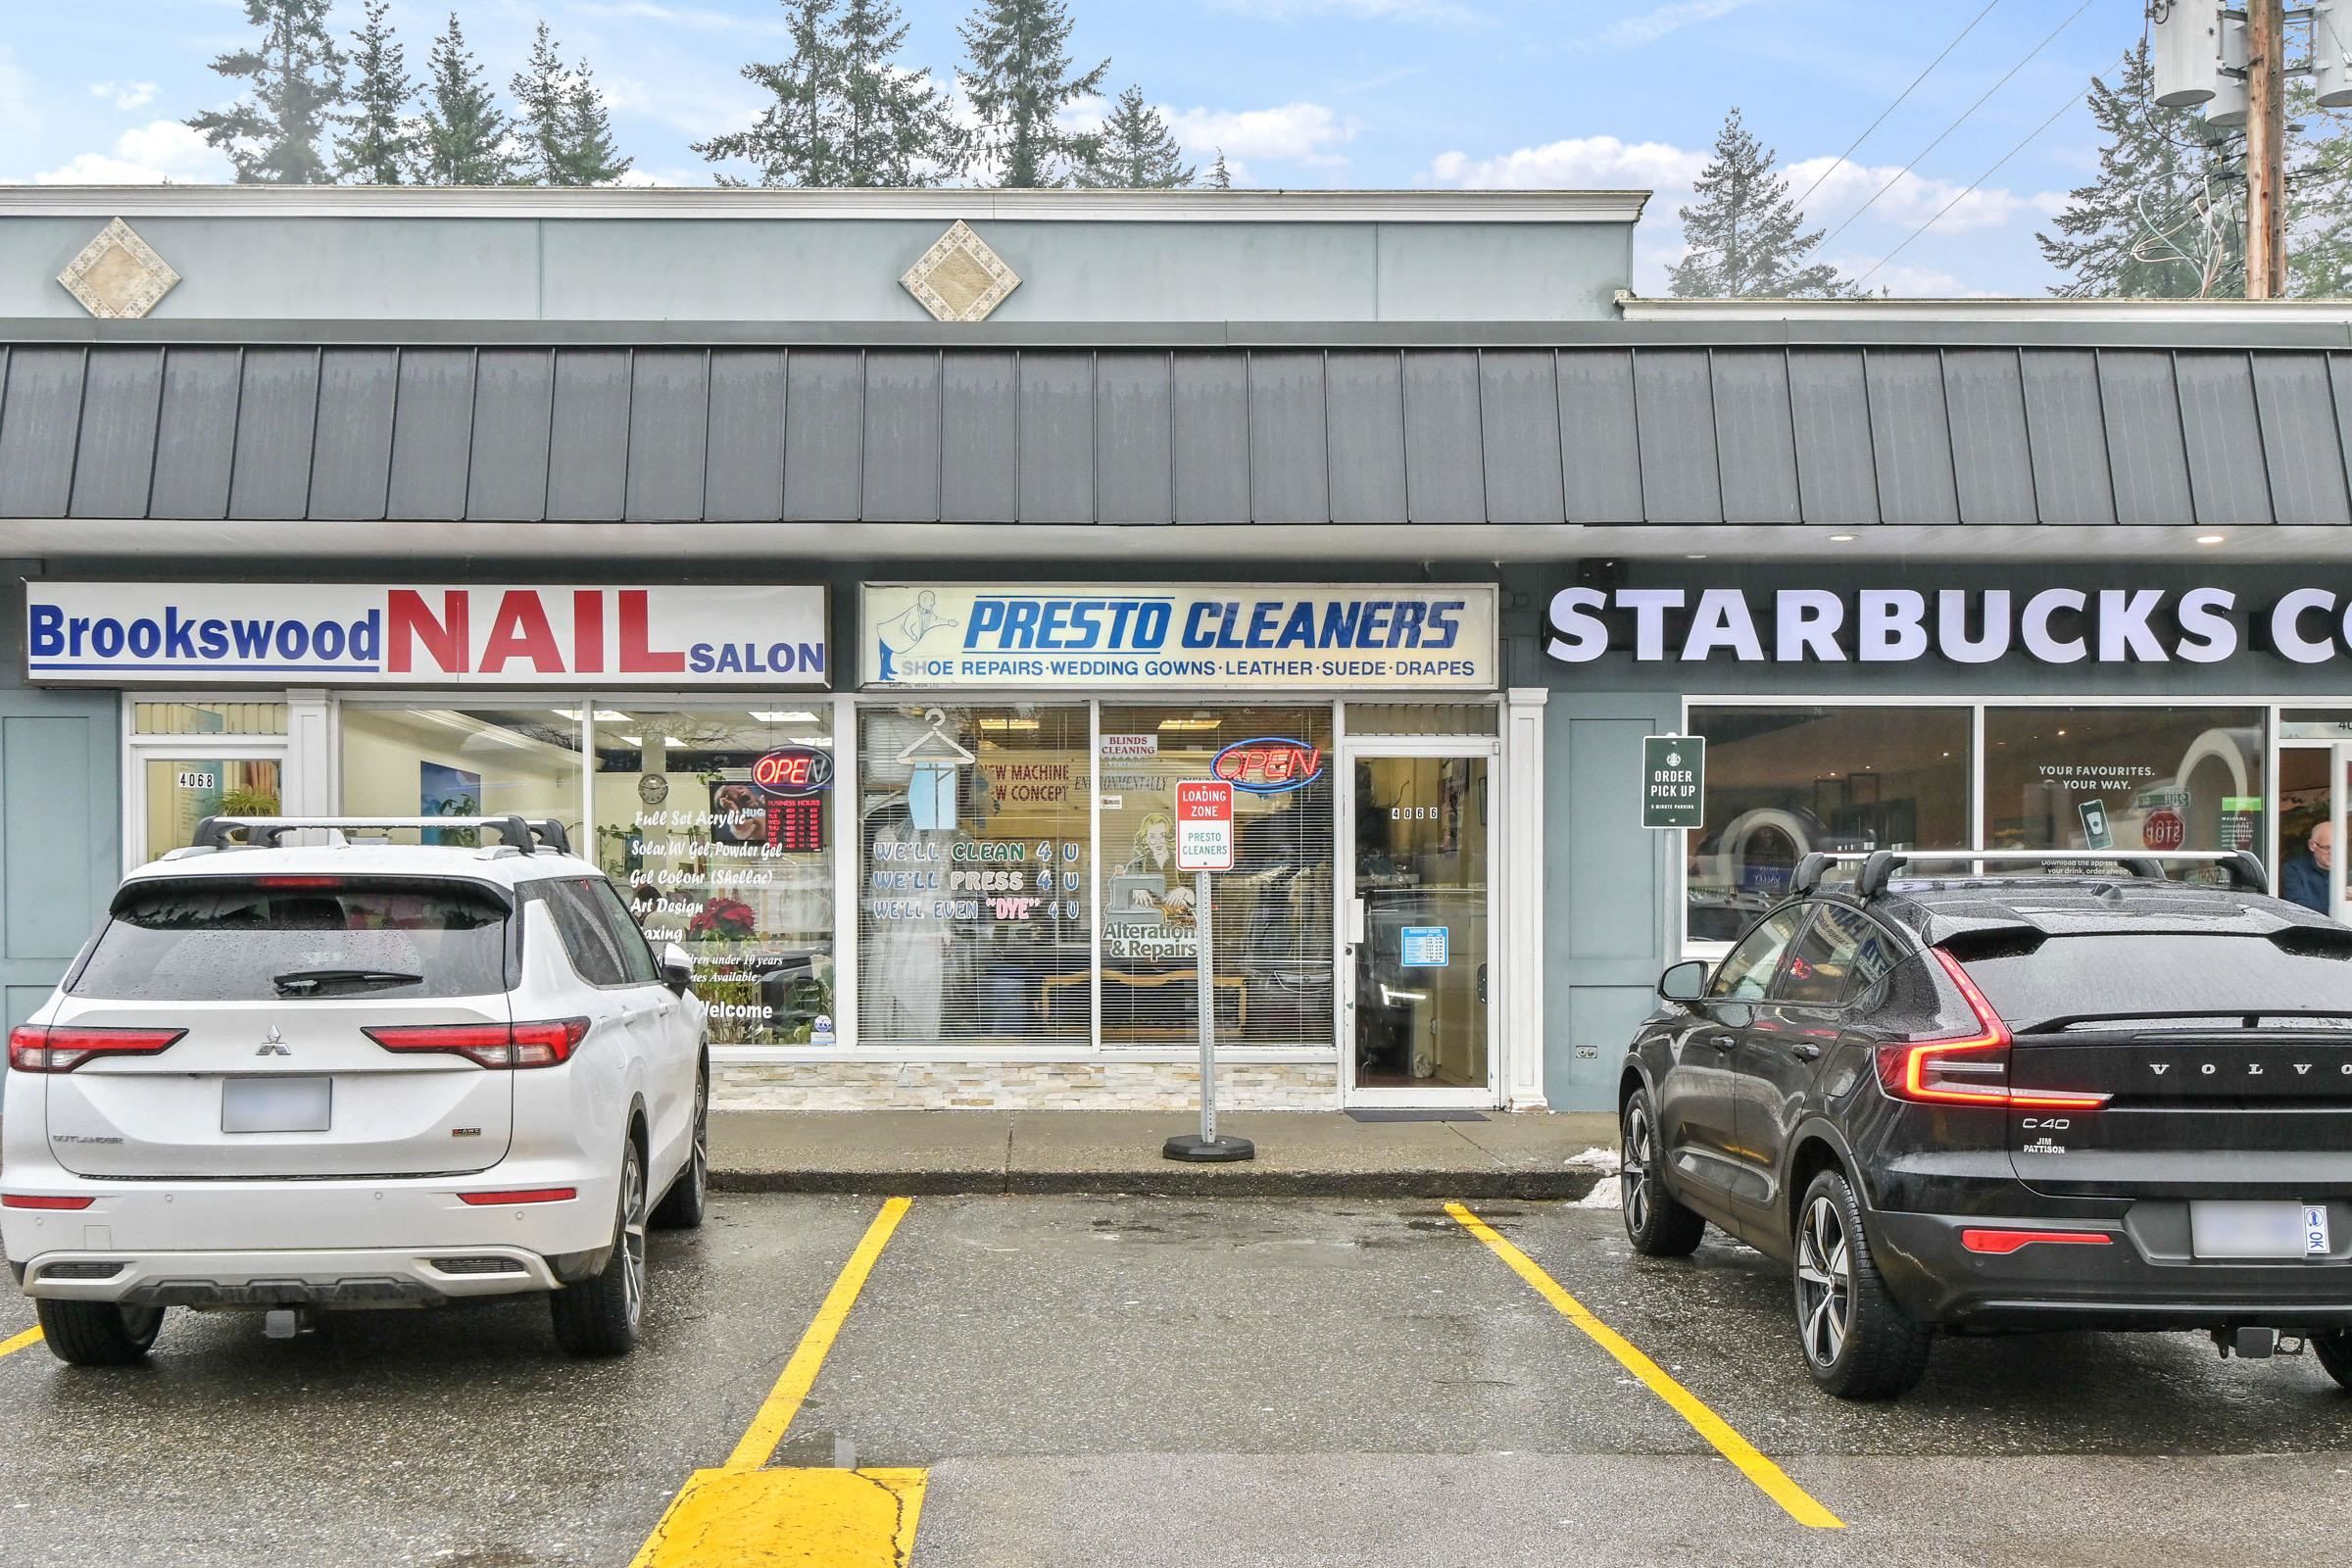 Main Photo: 4066 200 Street in Langley: Brookswood Langley Business for sale : MLS®# C8057033